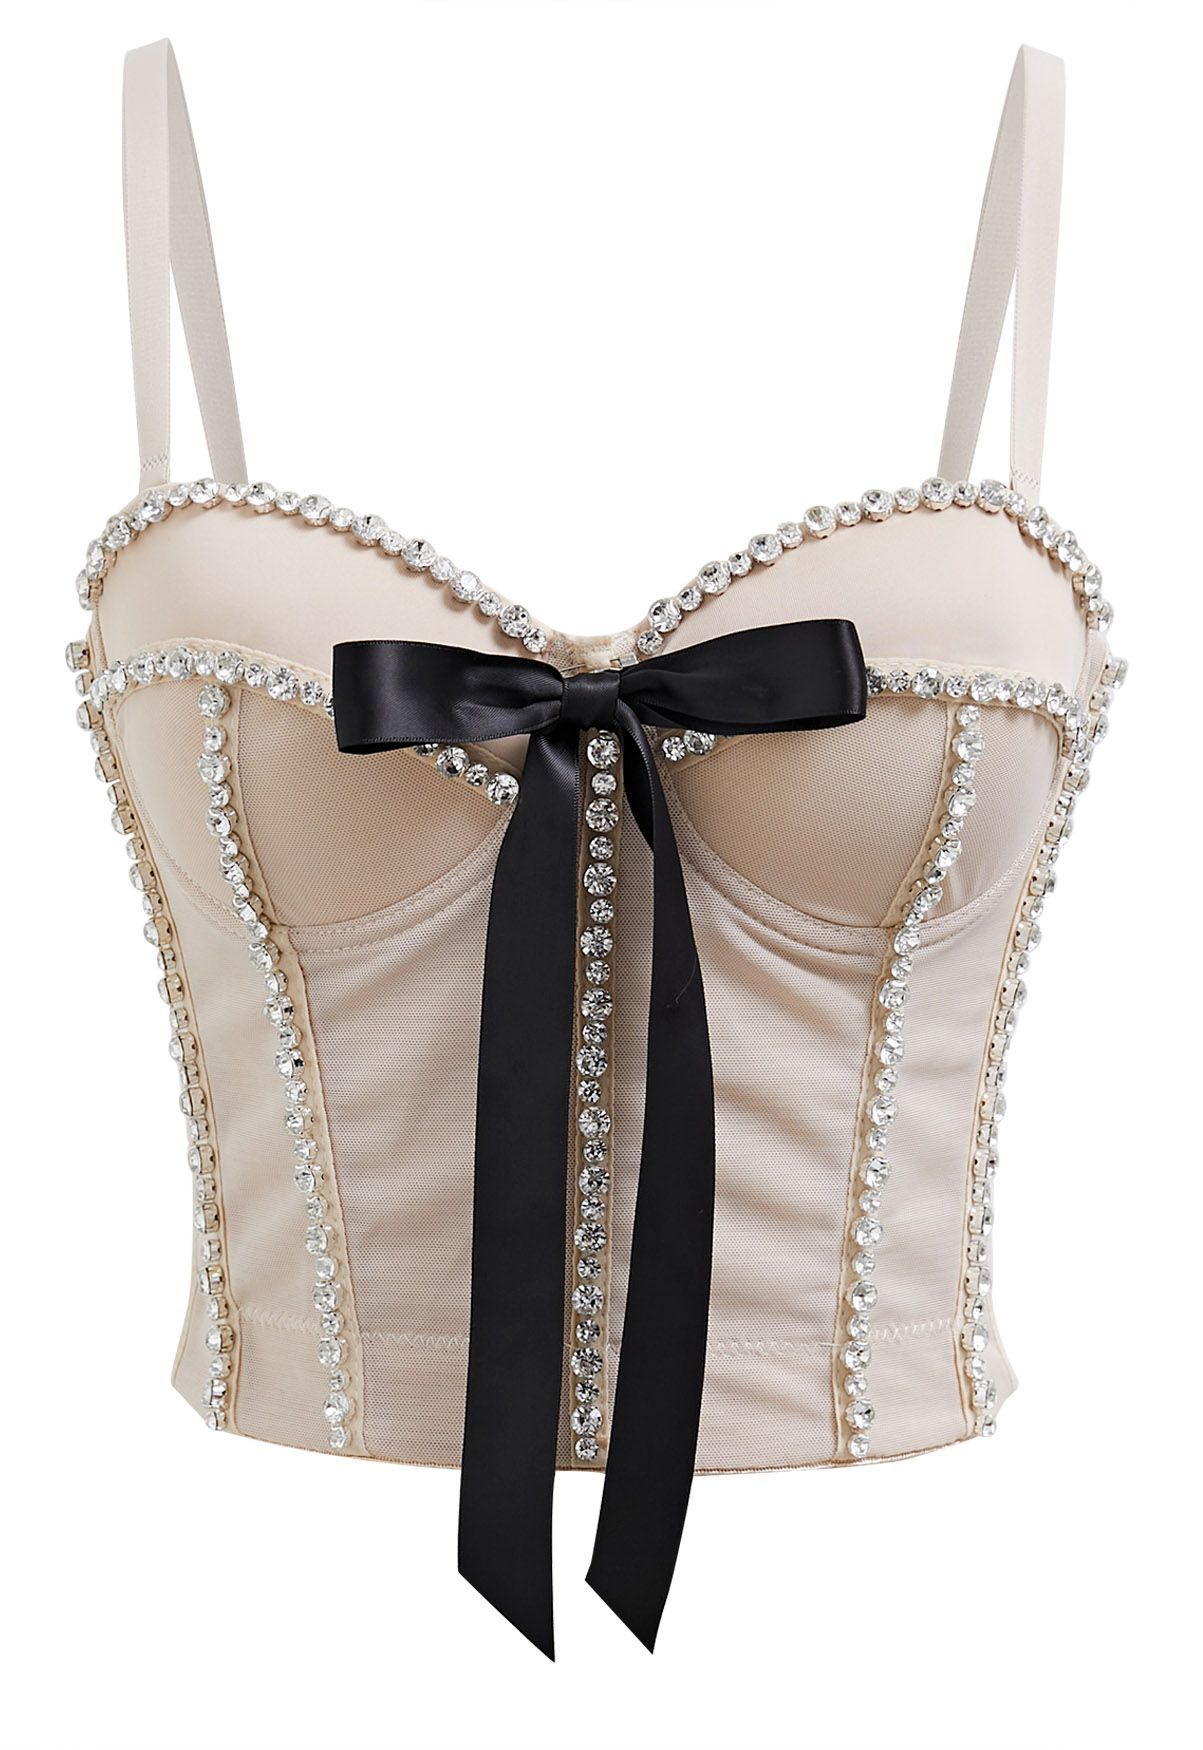 Bowknot Rhinestone Embellished Bustier Crop Top in Apricot | Chicwish